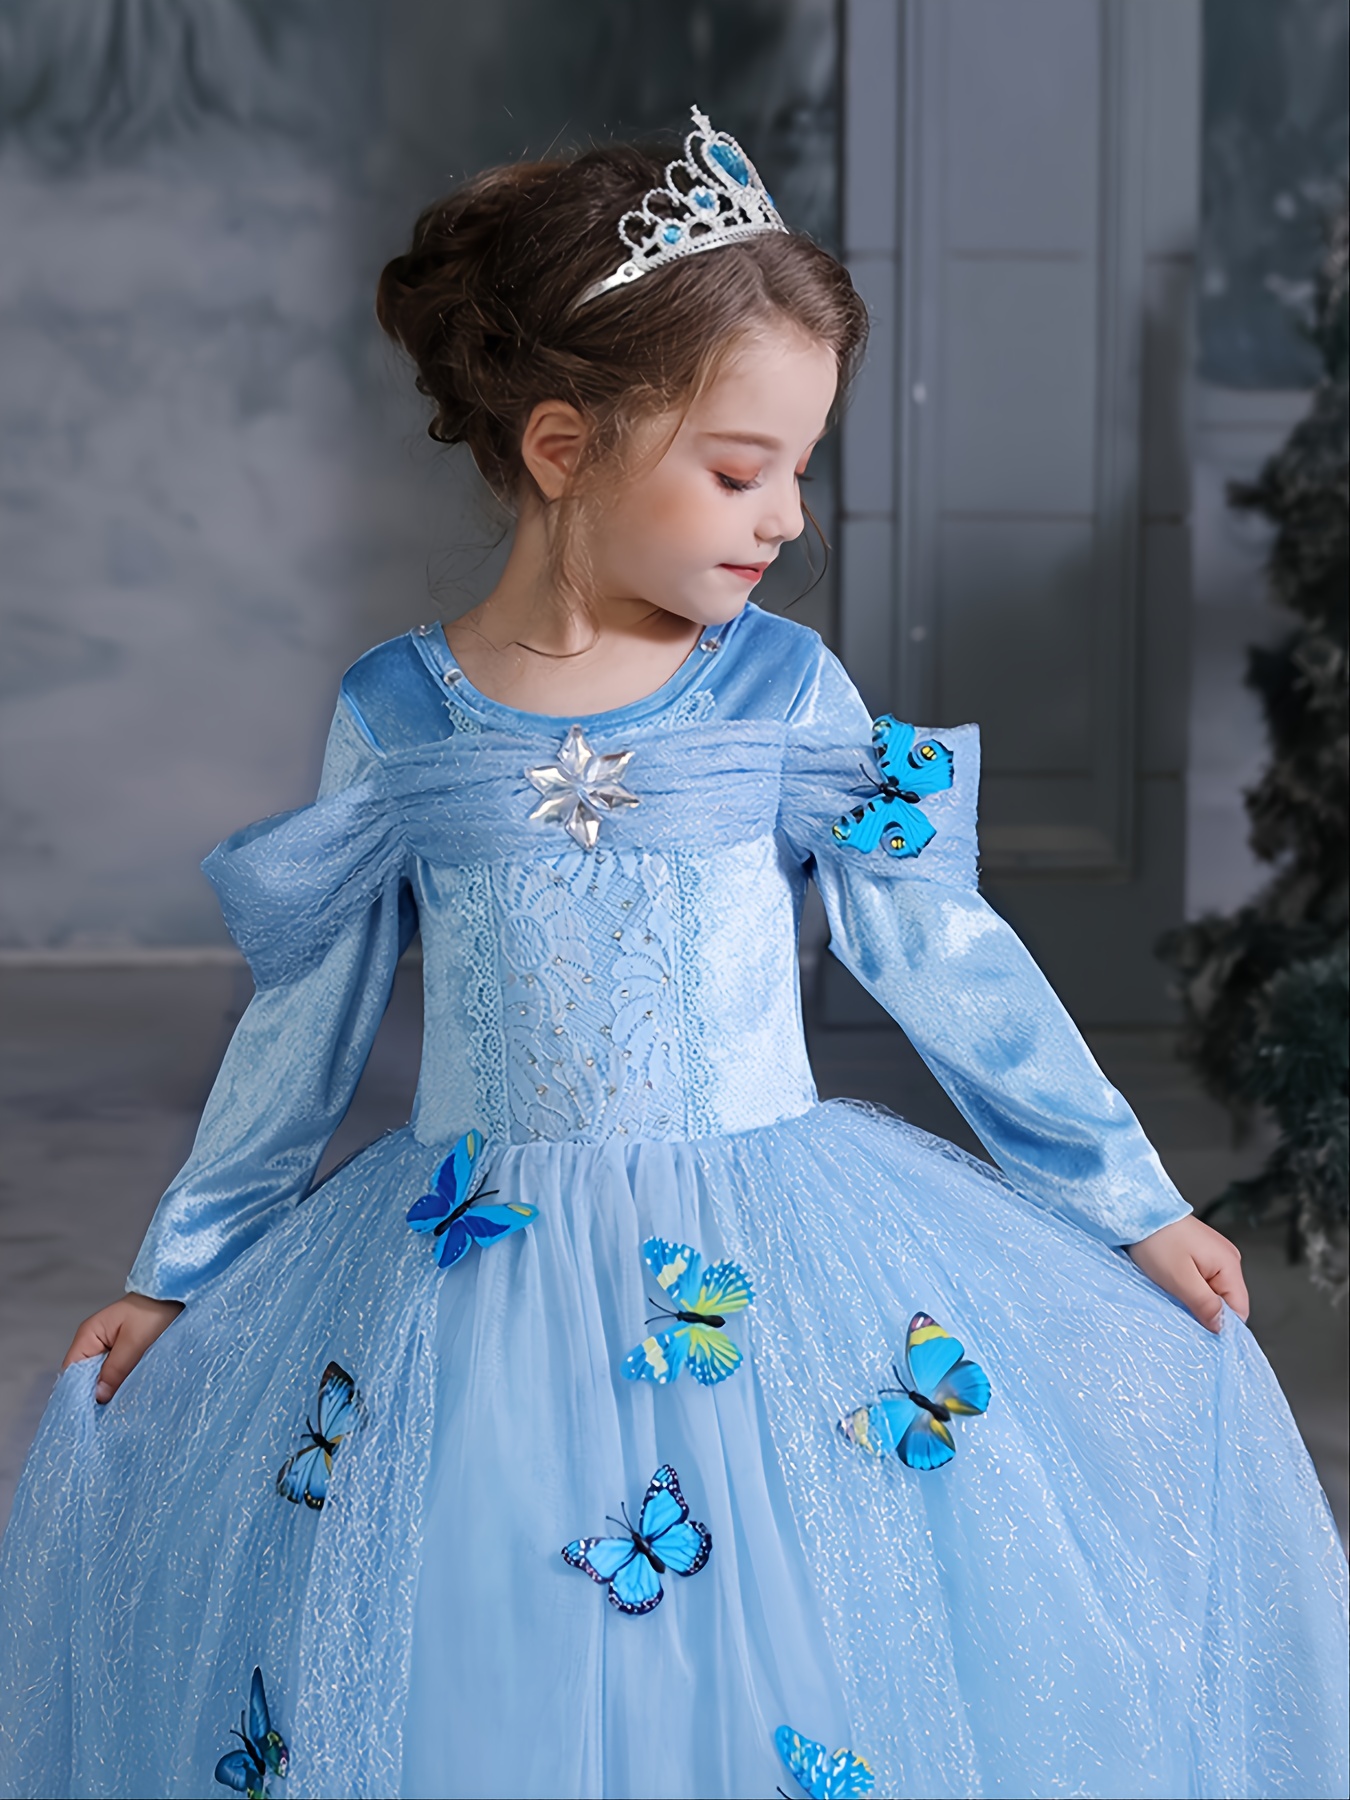 8pcs Girls Butterfly Princess Dress With Accessories, Party Dresses Clothes